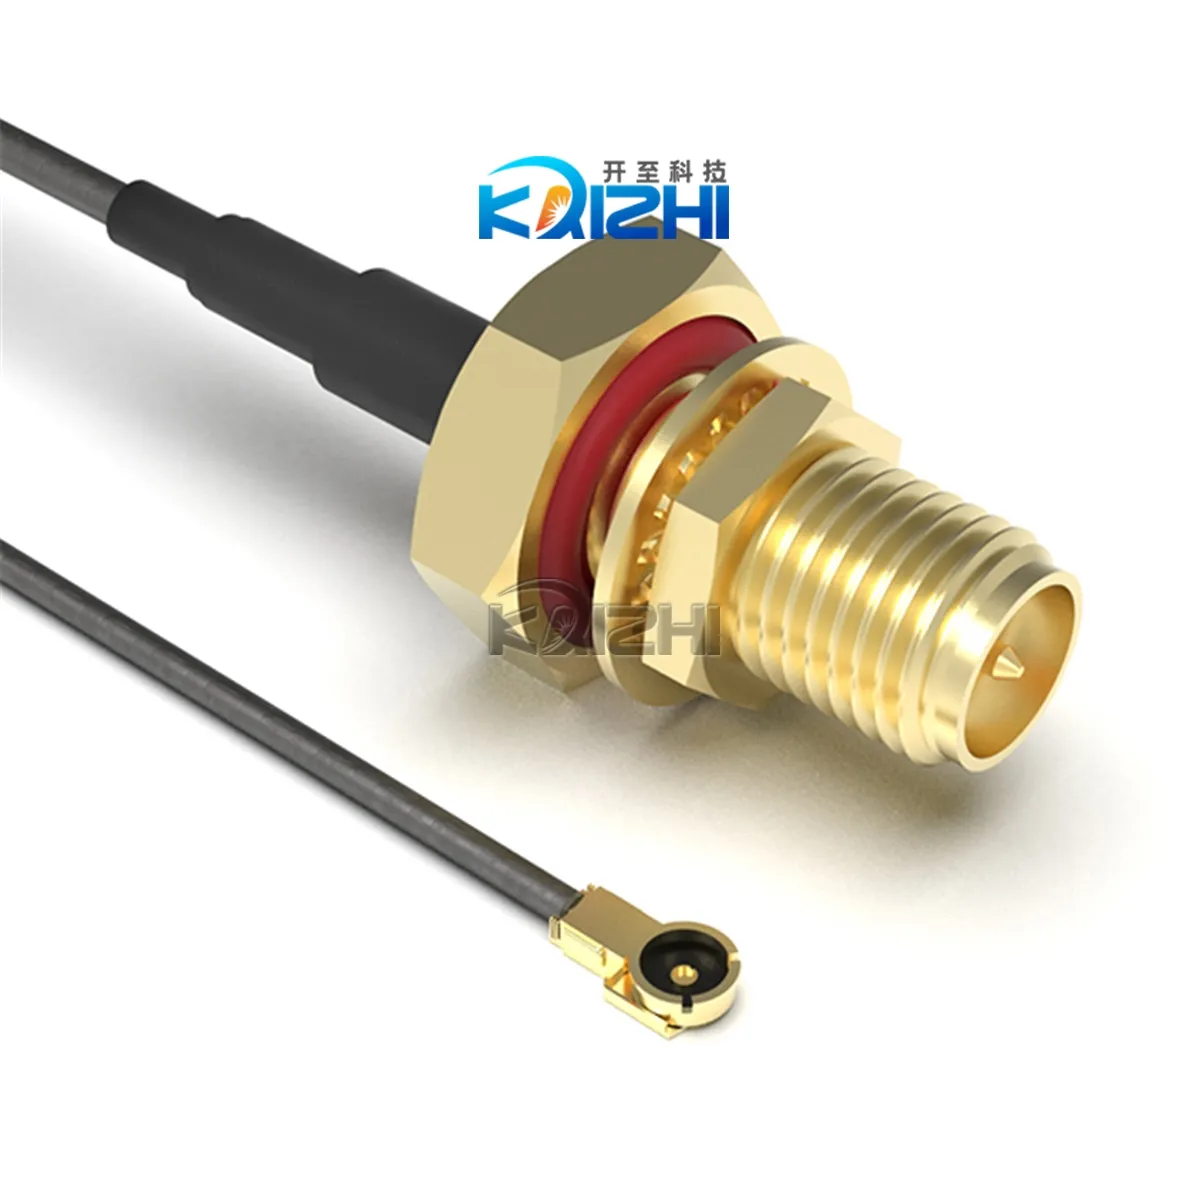 IN STOCK ORIGINAL BRAND RF CABLE COAXIAL RPSMA-MHF4L J-PL 7.874" CABLE 378 RF-200-A-1